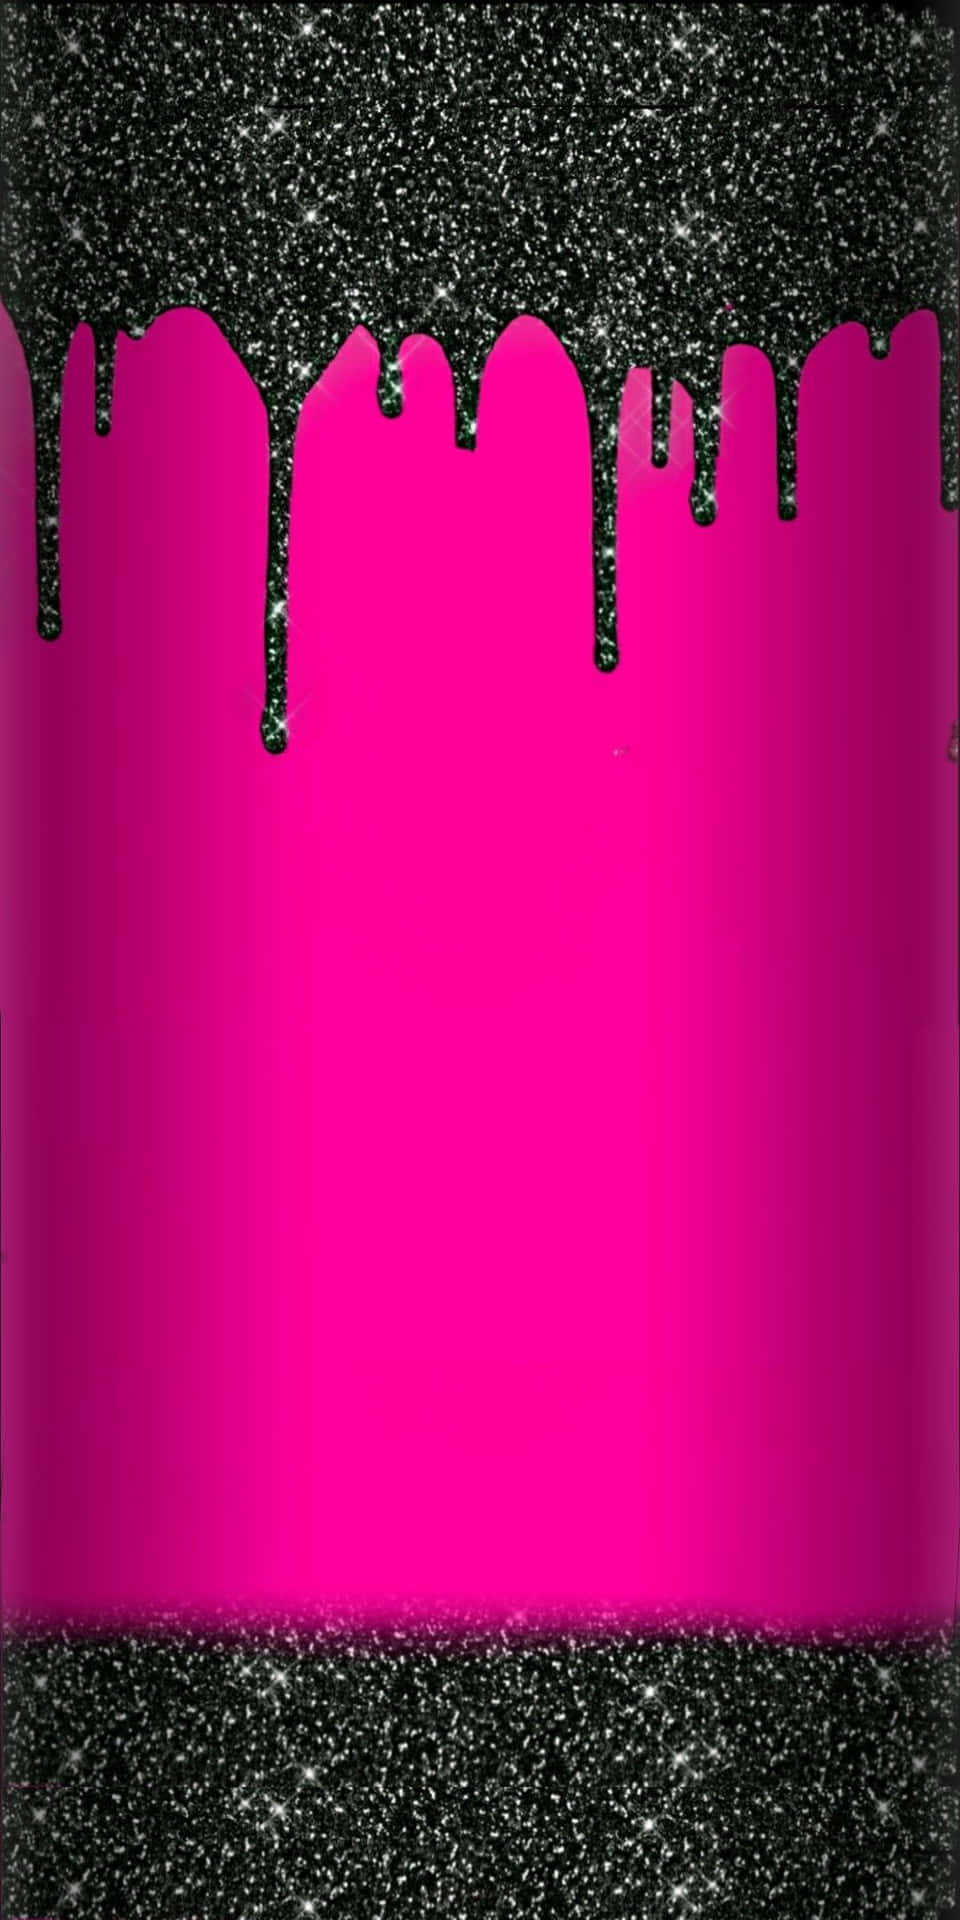 Free Pink And Black Glitter Wallpaper Downloads, [100+] Pink And Black  Glitter Wallpapers for FREE 